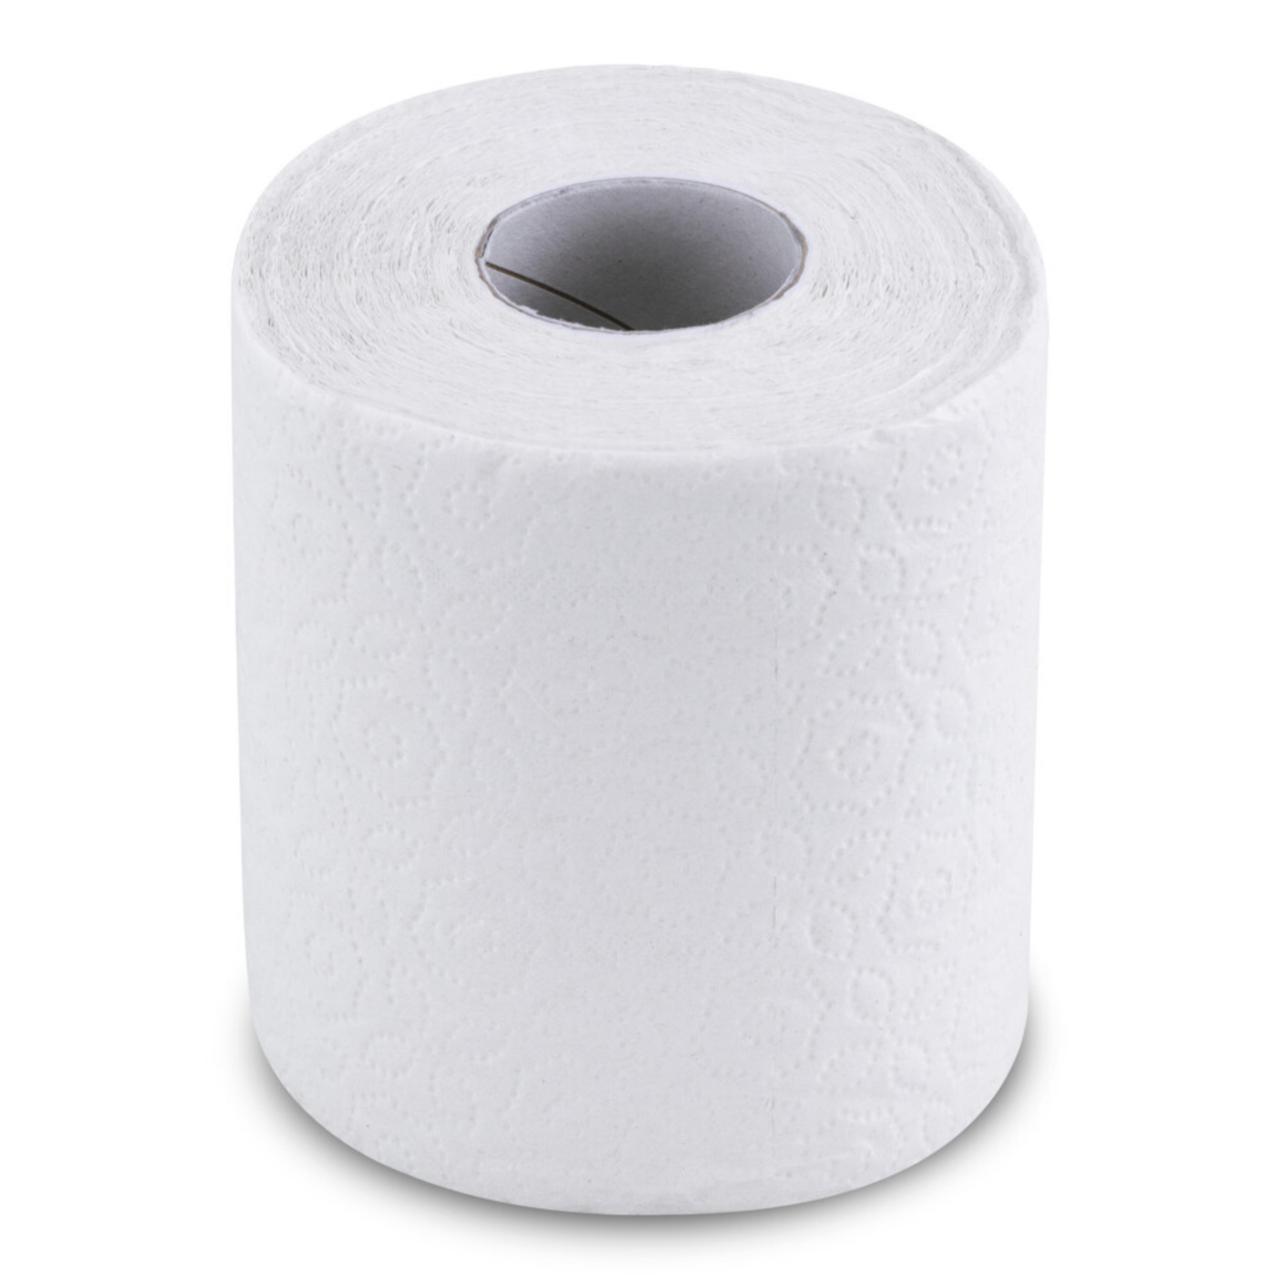 Dometic Ultra 2 ply - Toilet Paper/Tissue 2-PLY 96 ROLLS/CARTON